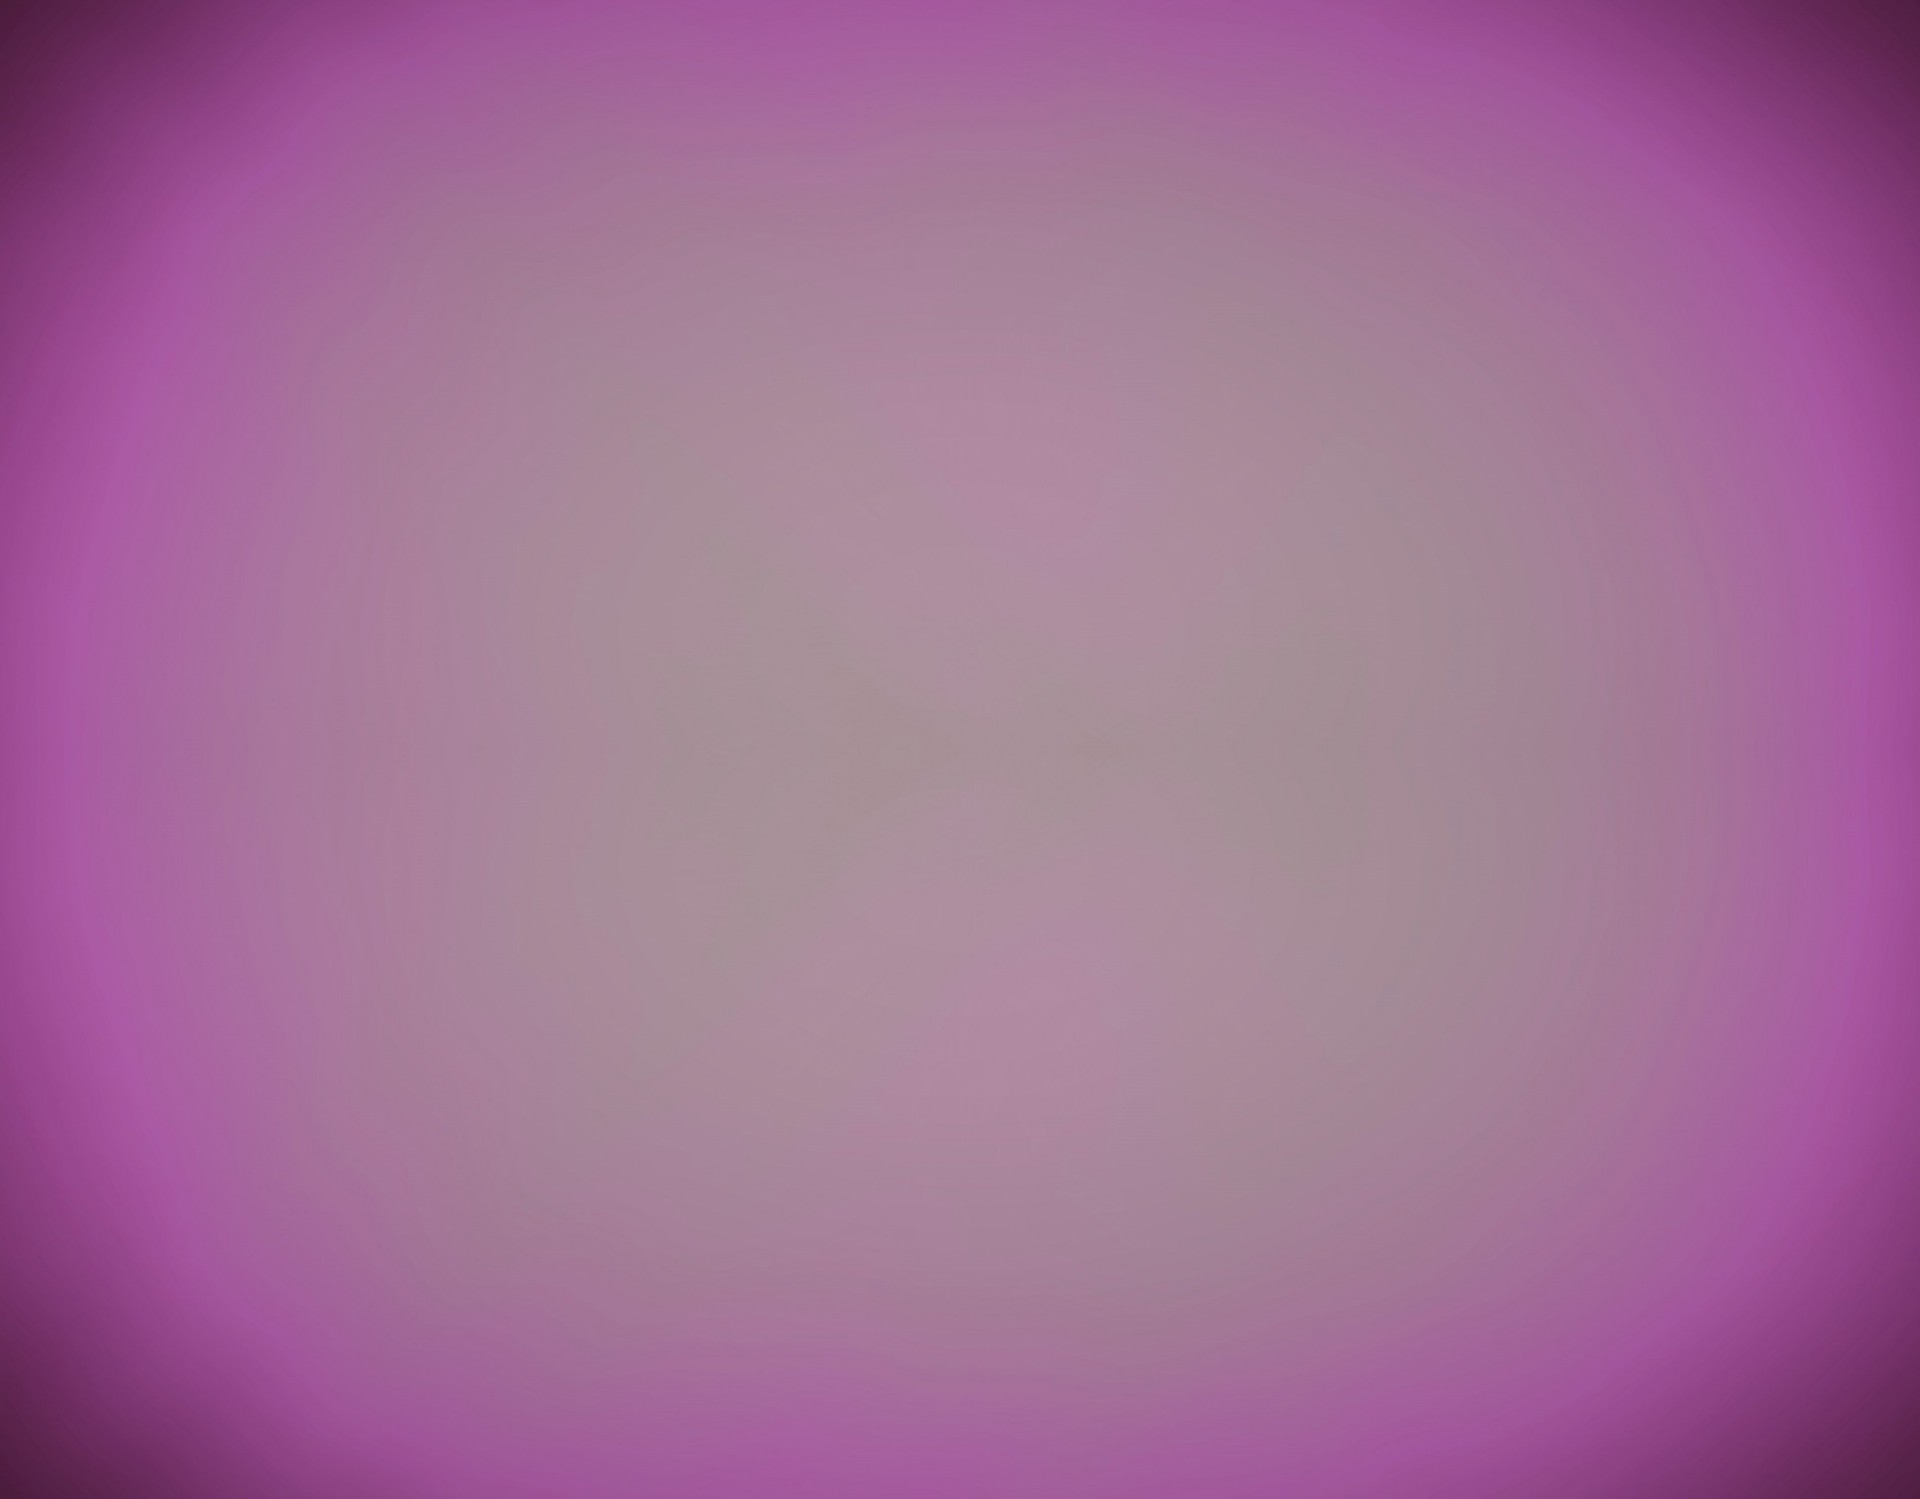 Background Pink Vigte Diffused Bright